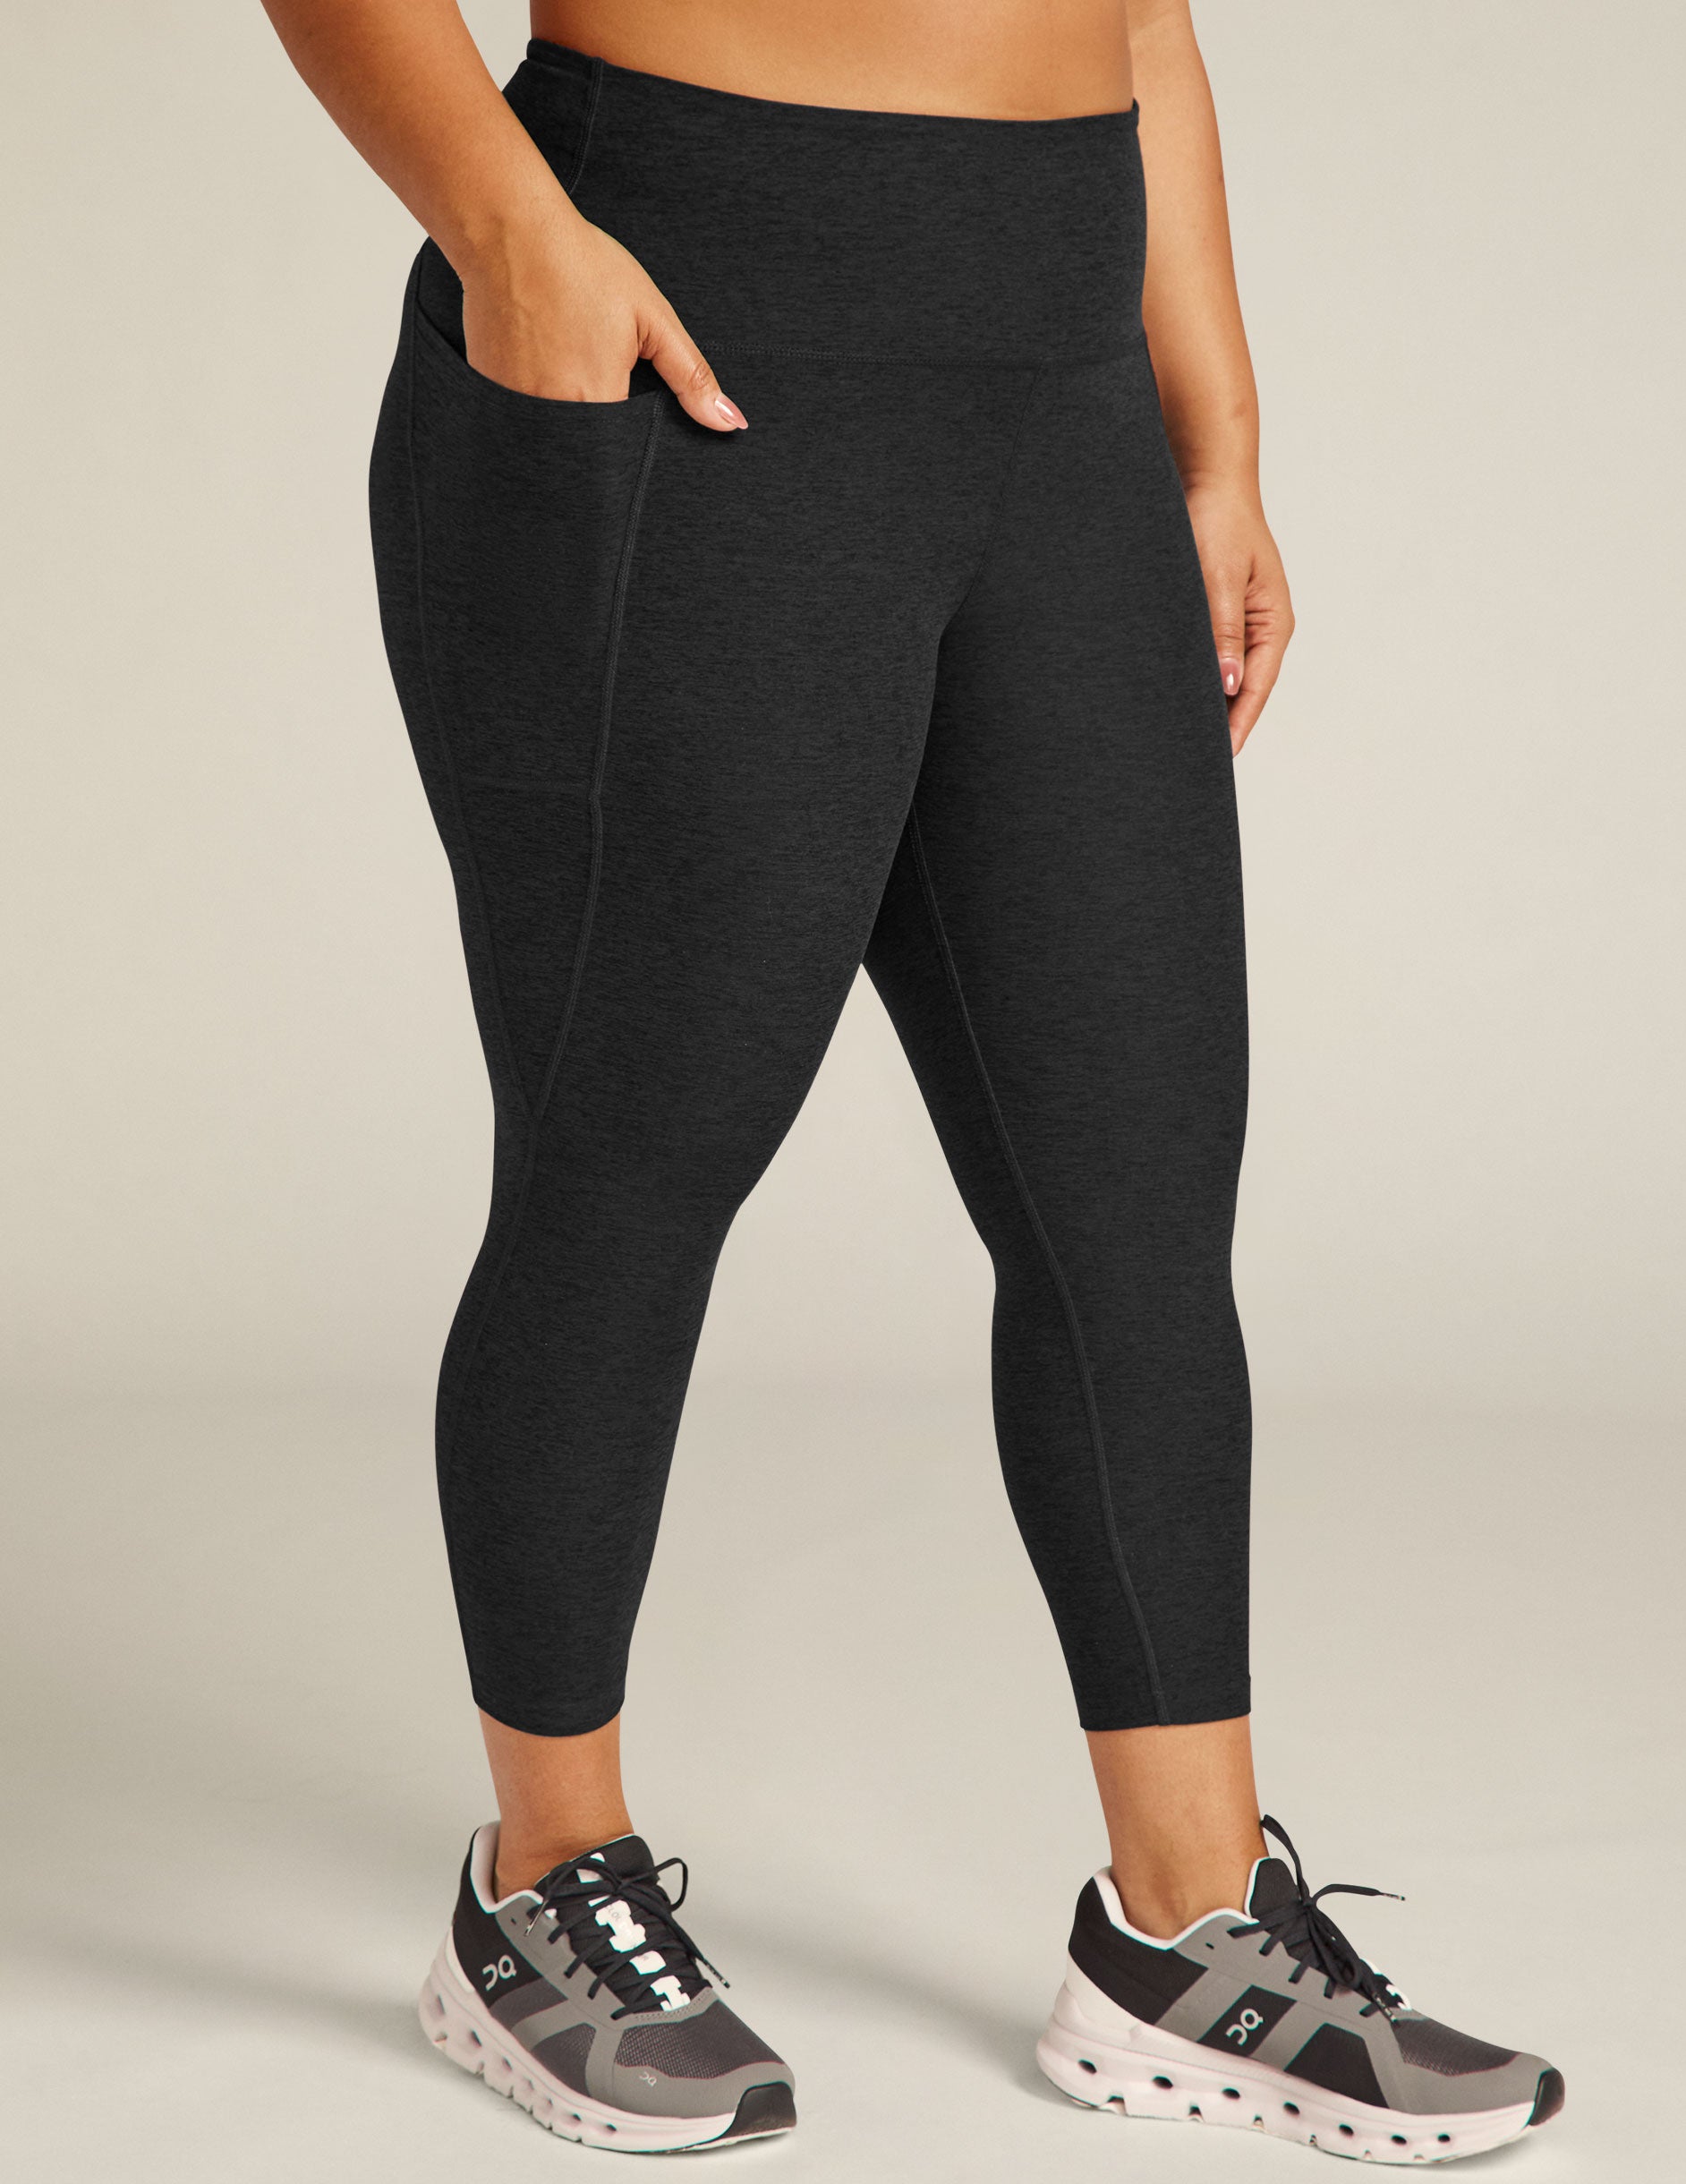 Beyond Yoga Lux High Waisted Midi Leggings in Stellar Blue Cloud Size XL -  $55 (30% Off Retail) New With Tags - From Callie